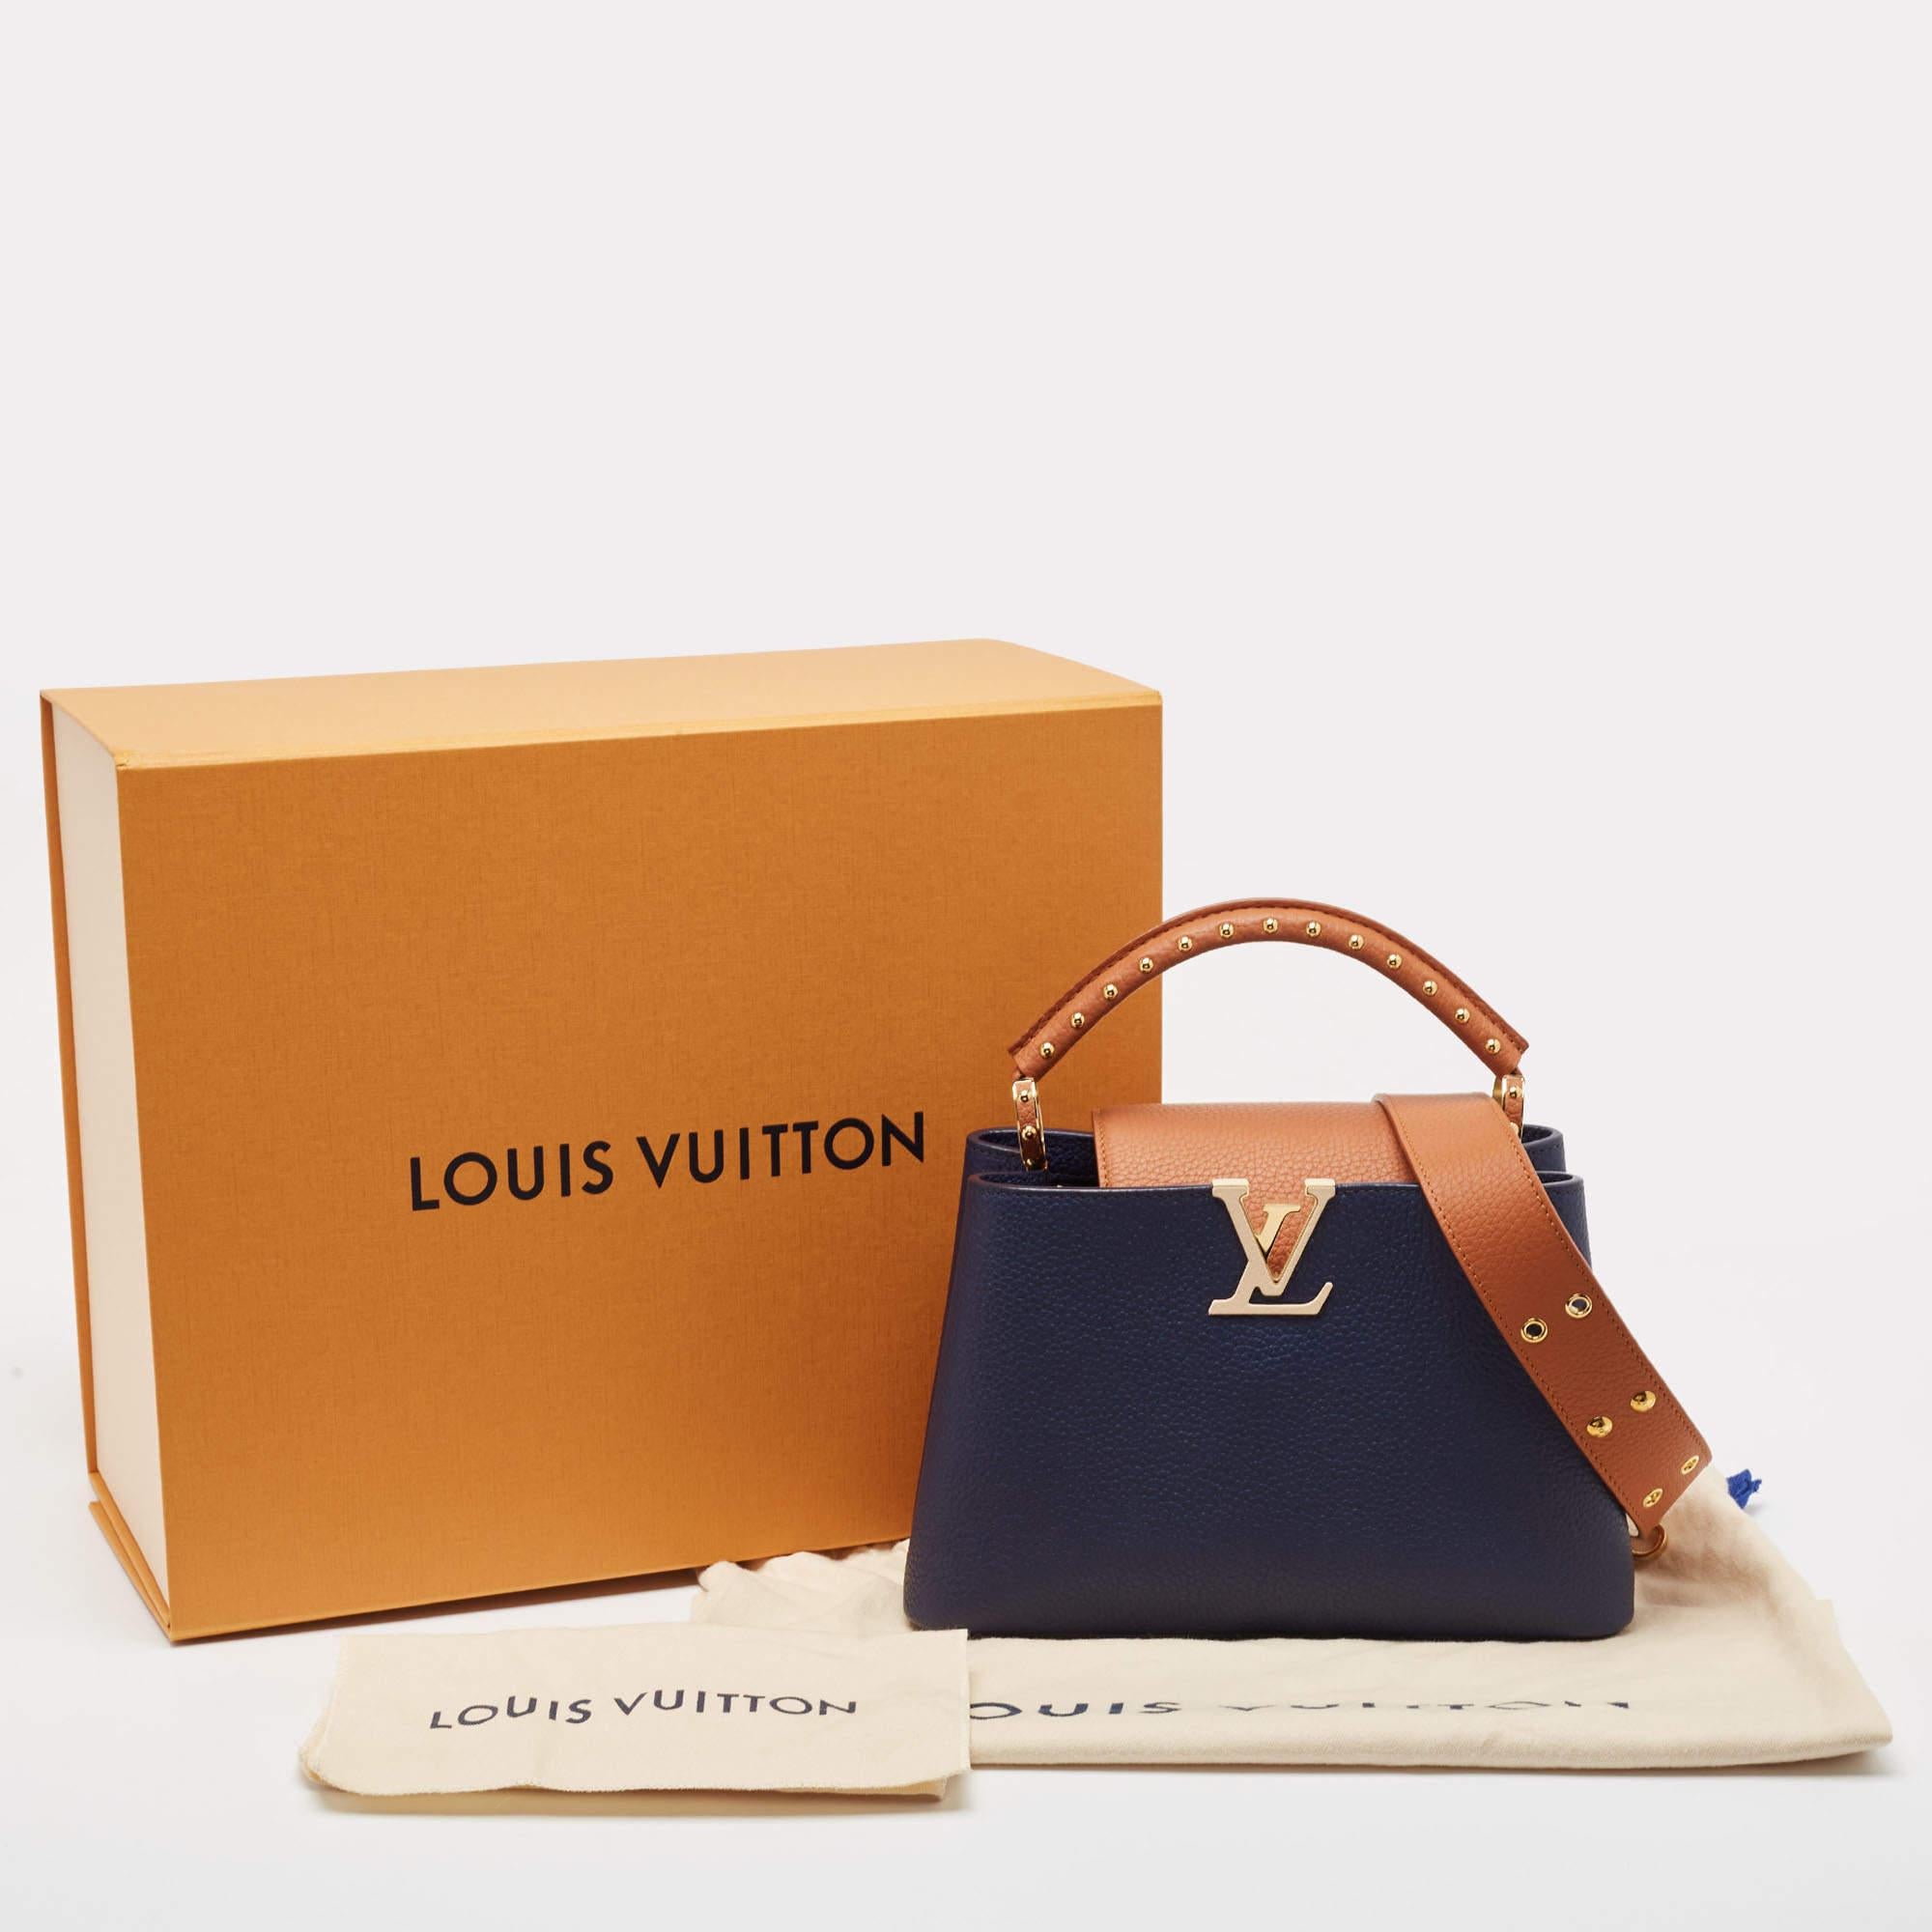 Louis Vuitton Navy Blue/Brown Leather Studded Capucines BB Bag 7